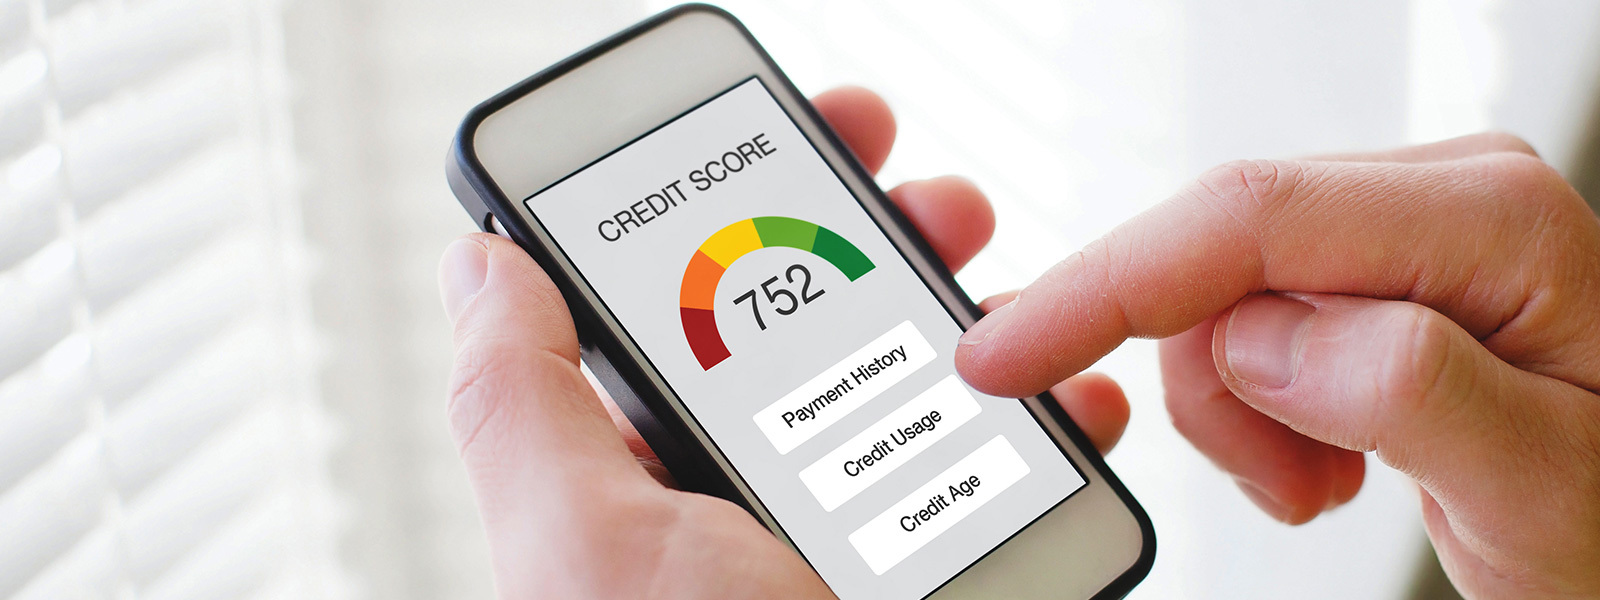 Man’s hand holding a smartphone showing a credit score as he checks to see if a soft credit check affected his credit score.